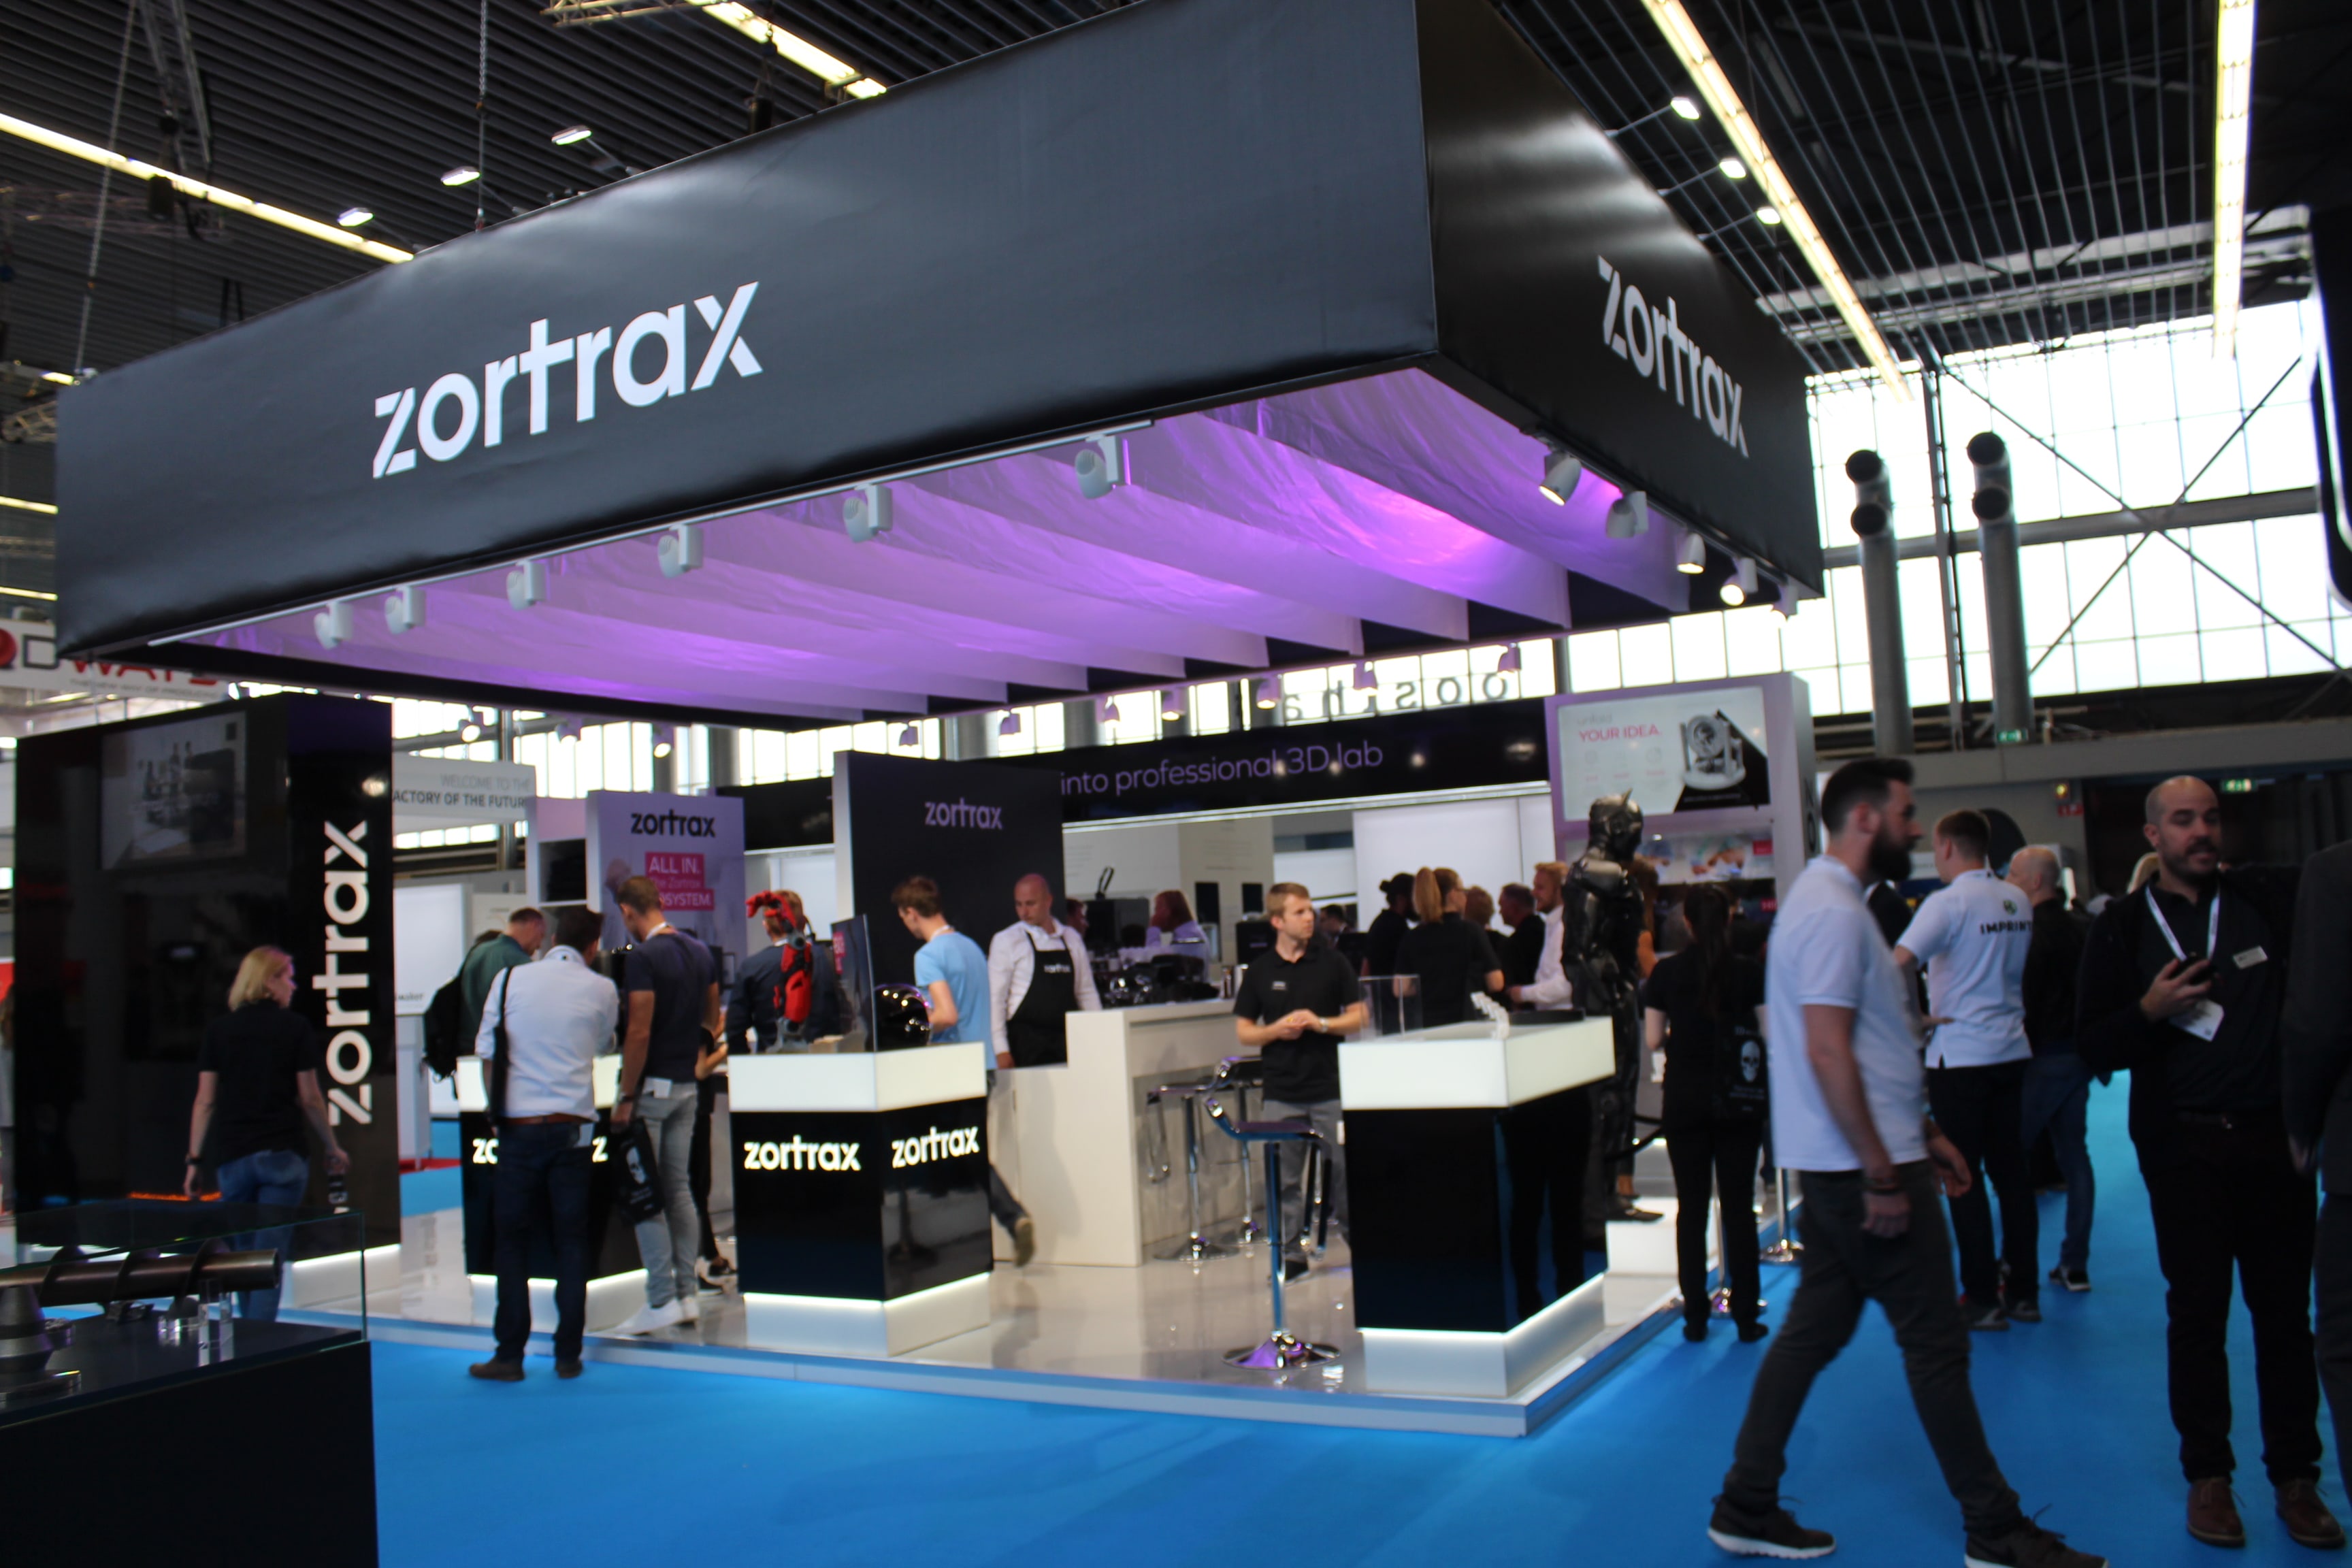 Zortrax's booth at an event